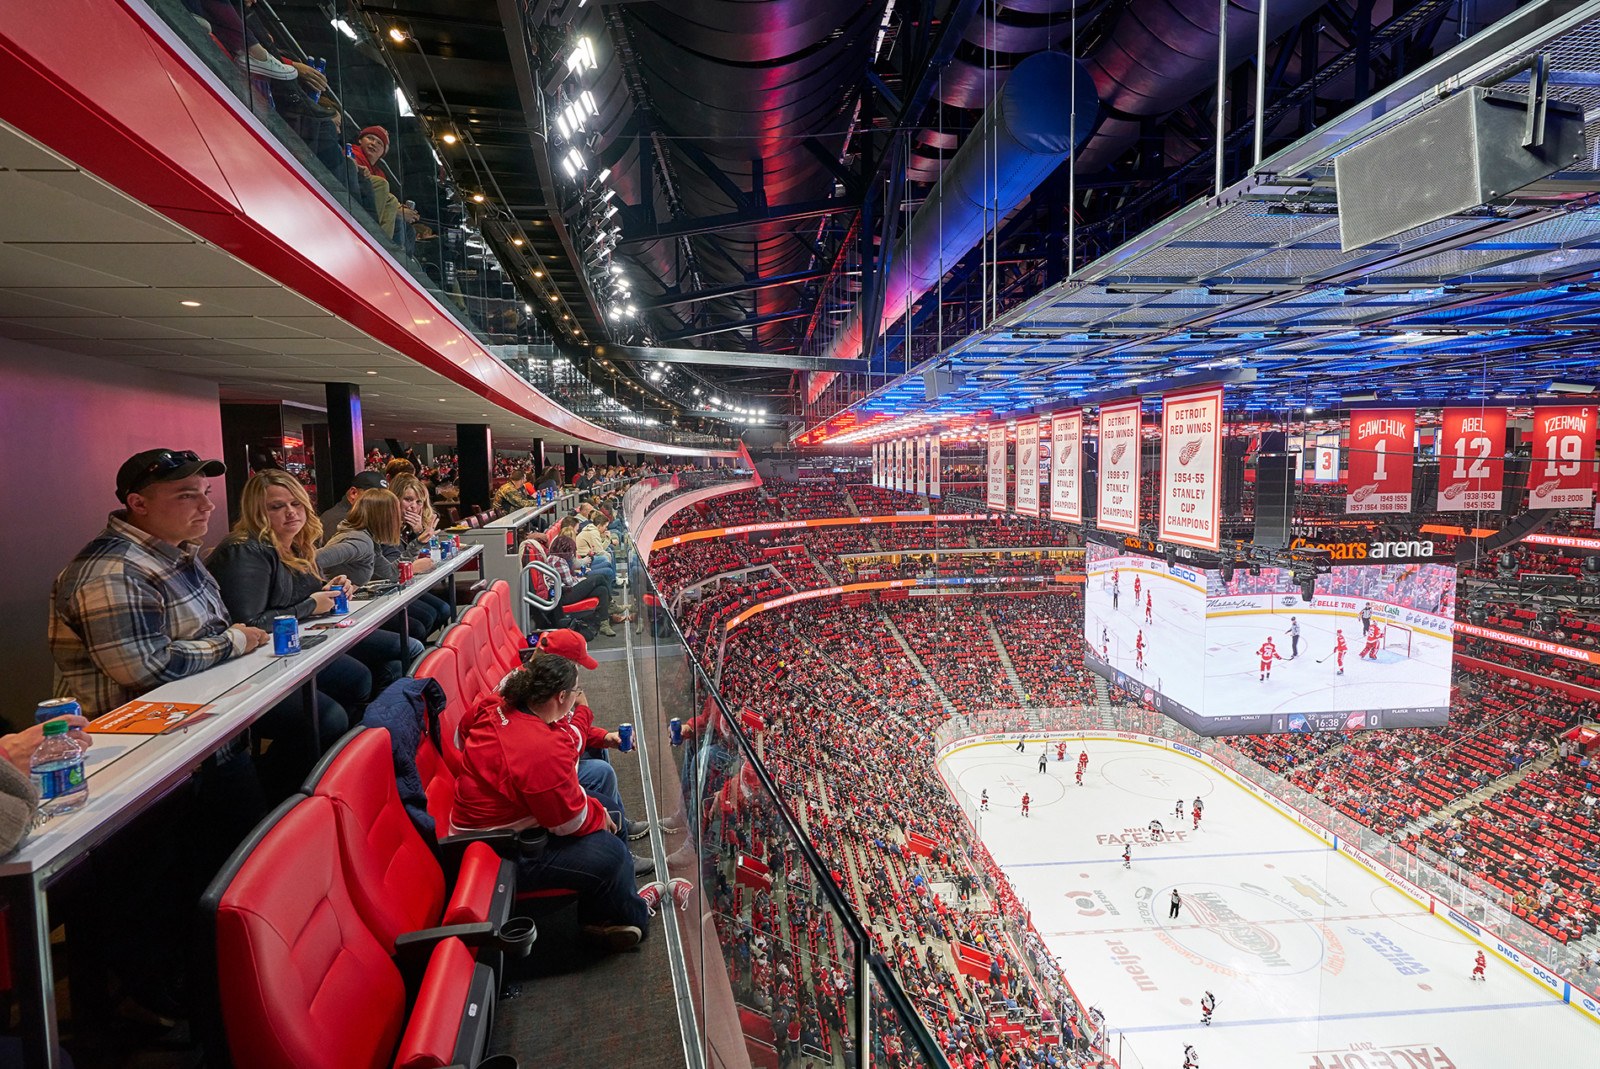 Getting to know Little Caesars Arena